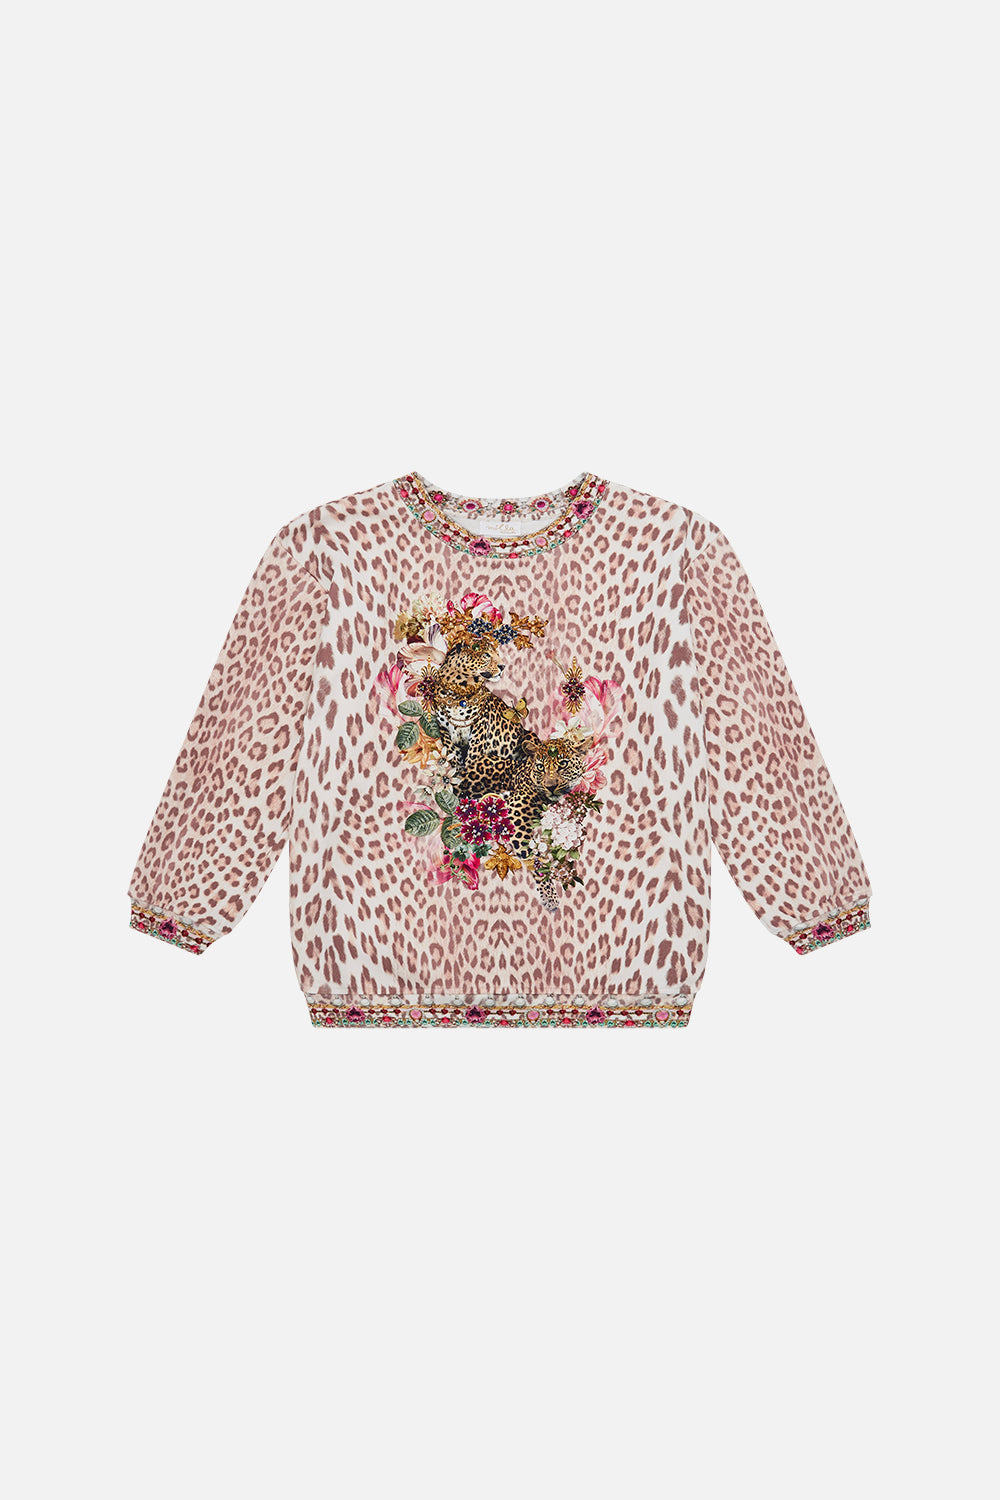 Product view of MILLA BY CAMILLA kids sweater in Bambino Bliss print